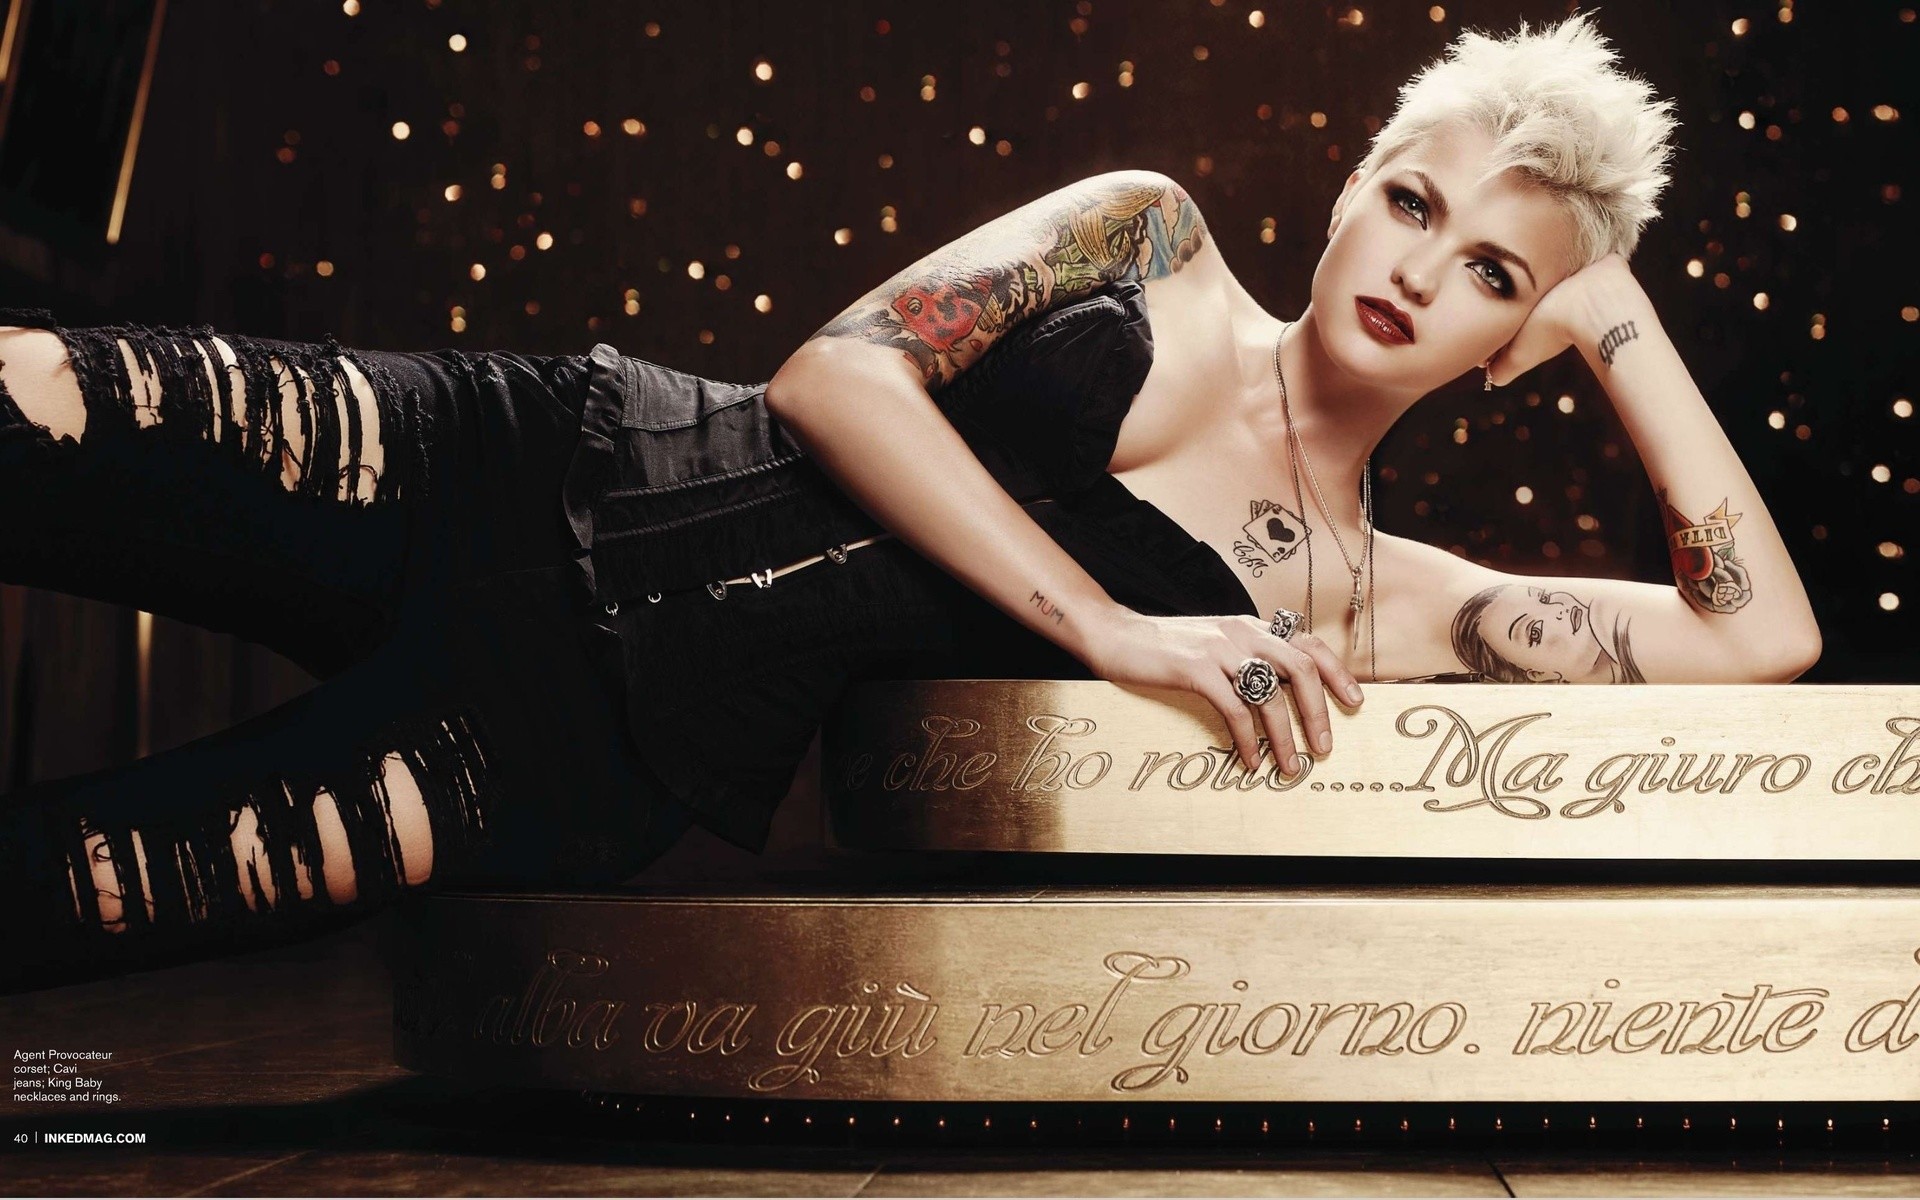 1920x1200 Ruby Rose Computer Wallpapers, Desktop Backgrounds |  ... Ruby  Rose TattooRose TattoosPin Up ...